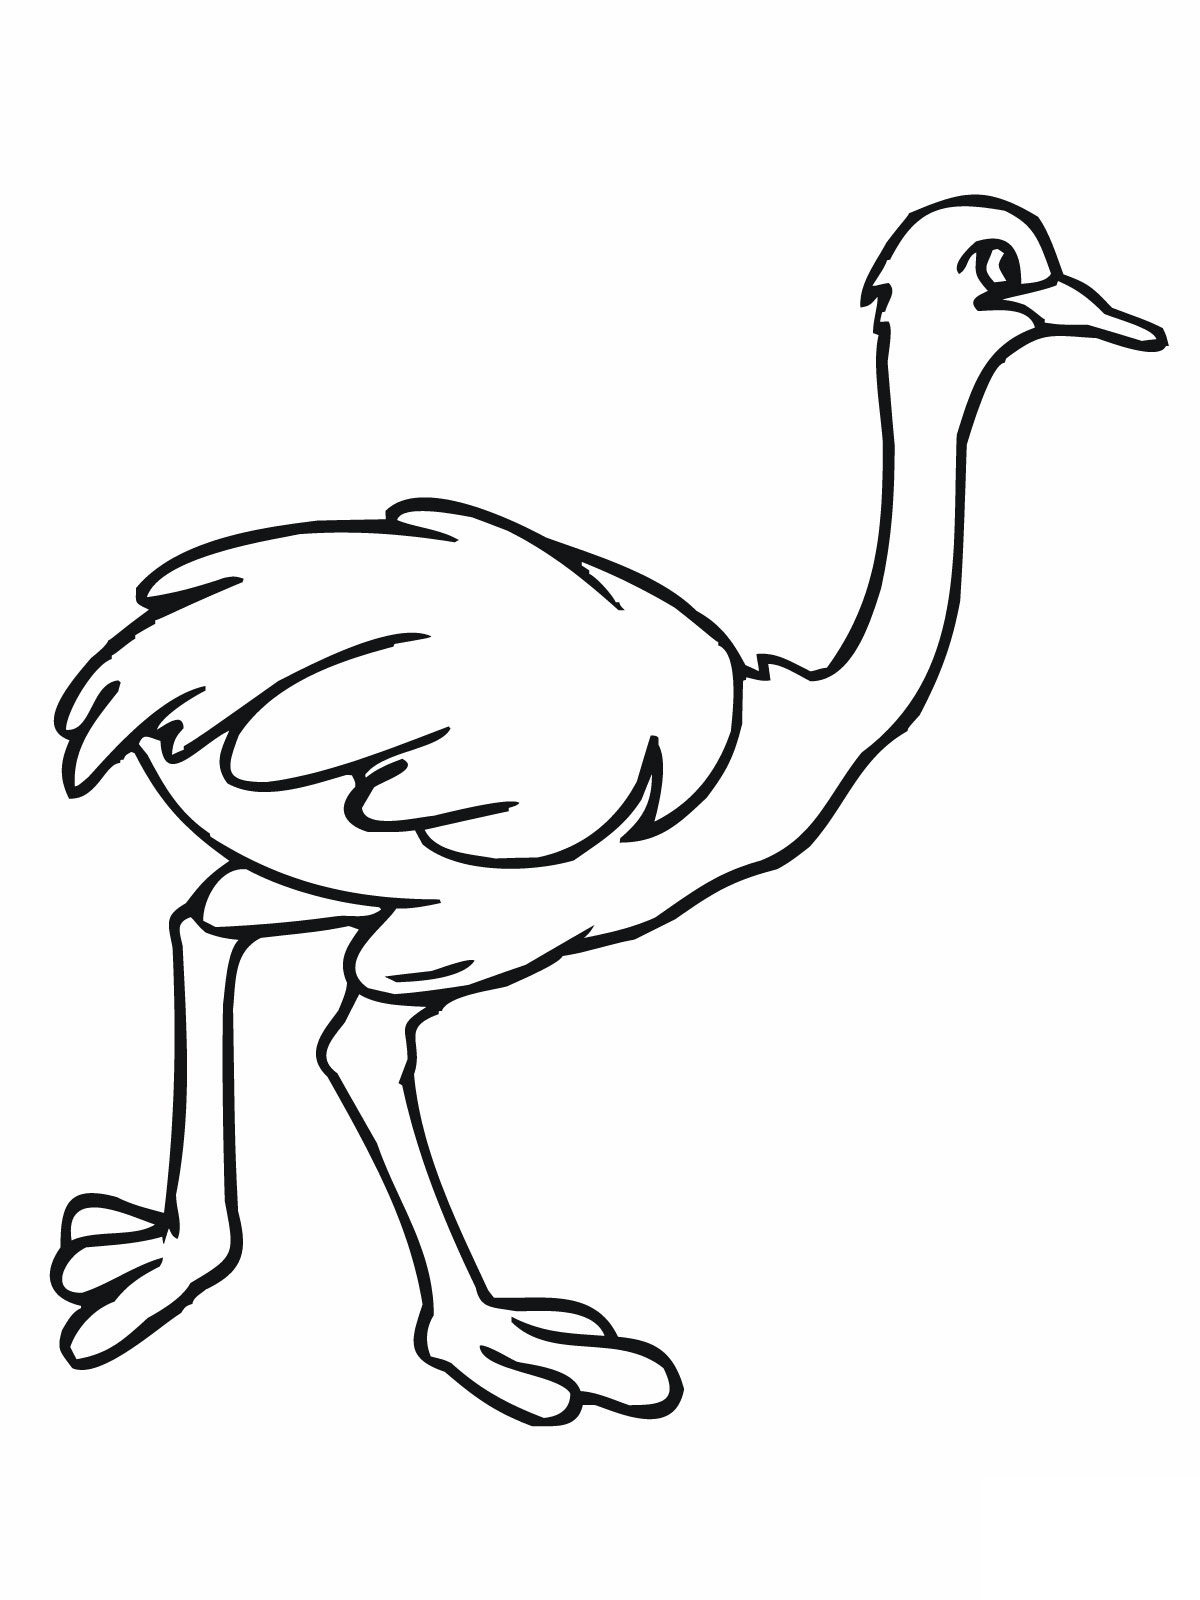 Ostrich coloring #19, Download drawings